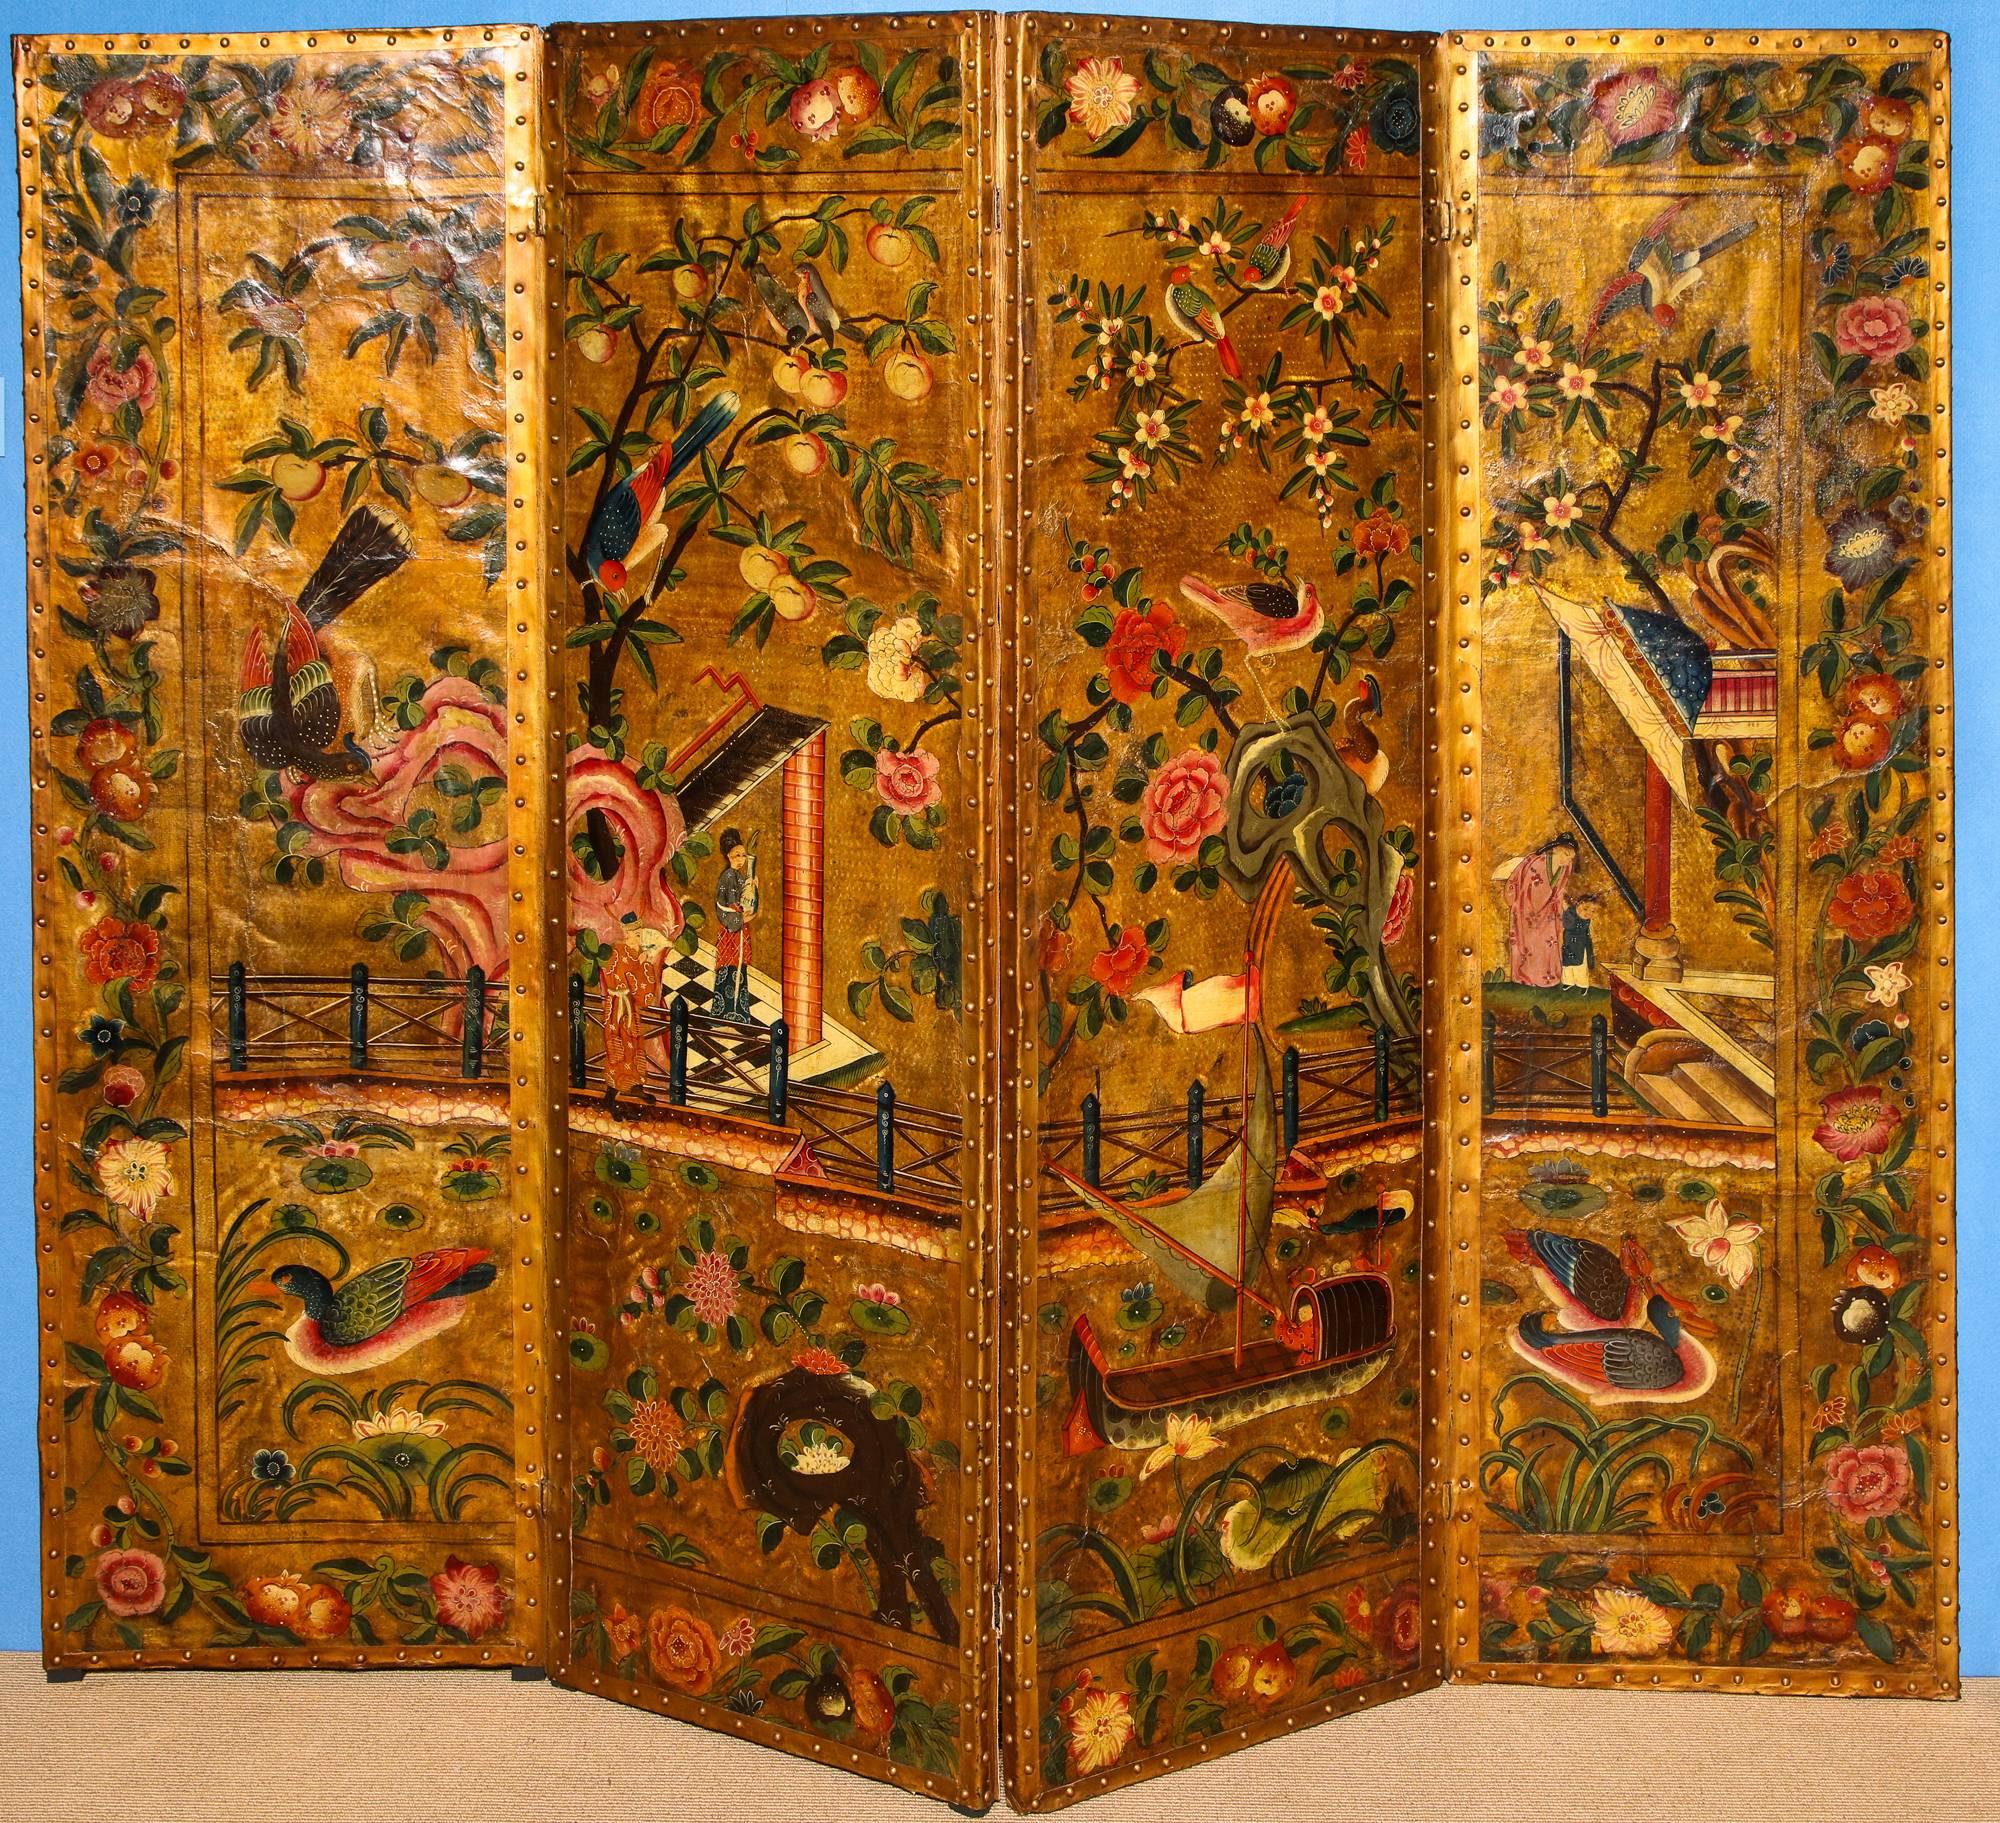 Mid-18th century chinoiserie polychrome painted four-panel gilt leather screen, decorated with figures and pavilions with a boat and flora and fauna in a watery landscape, all on a gilt ground within a colorful floral rectangular border,
English,